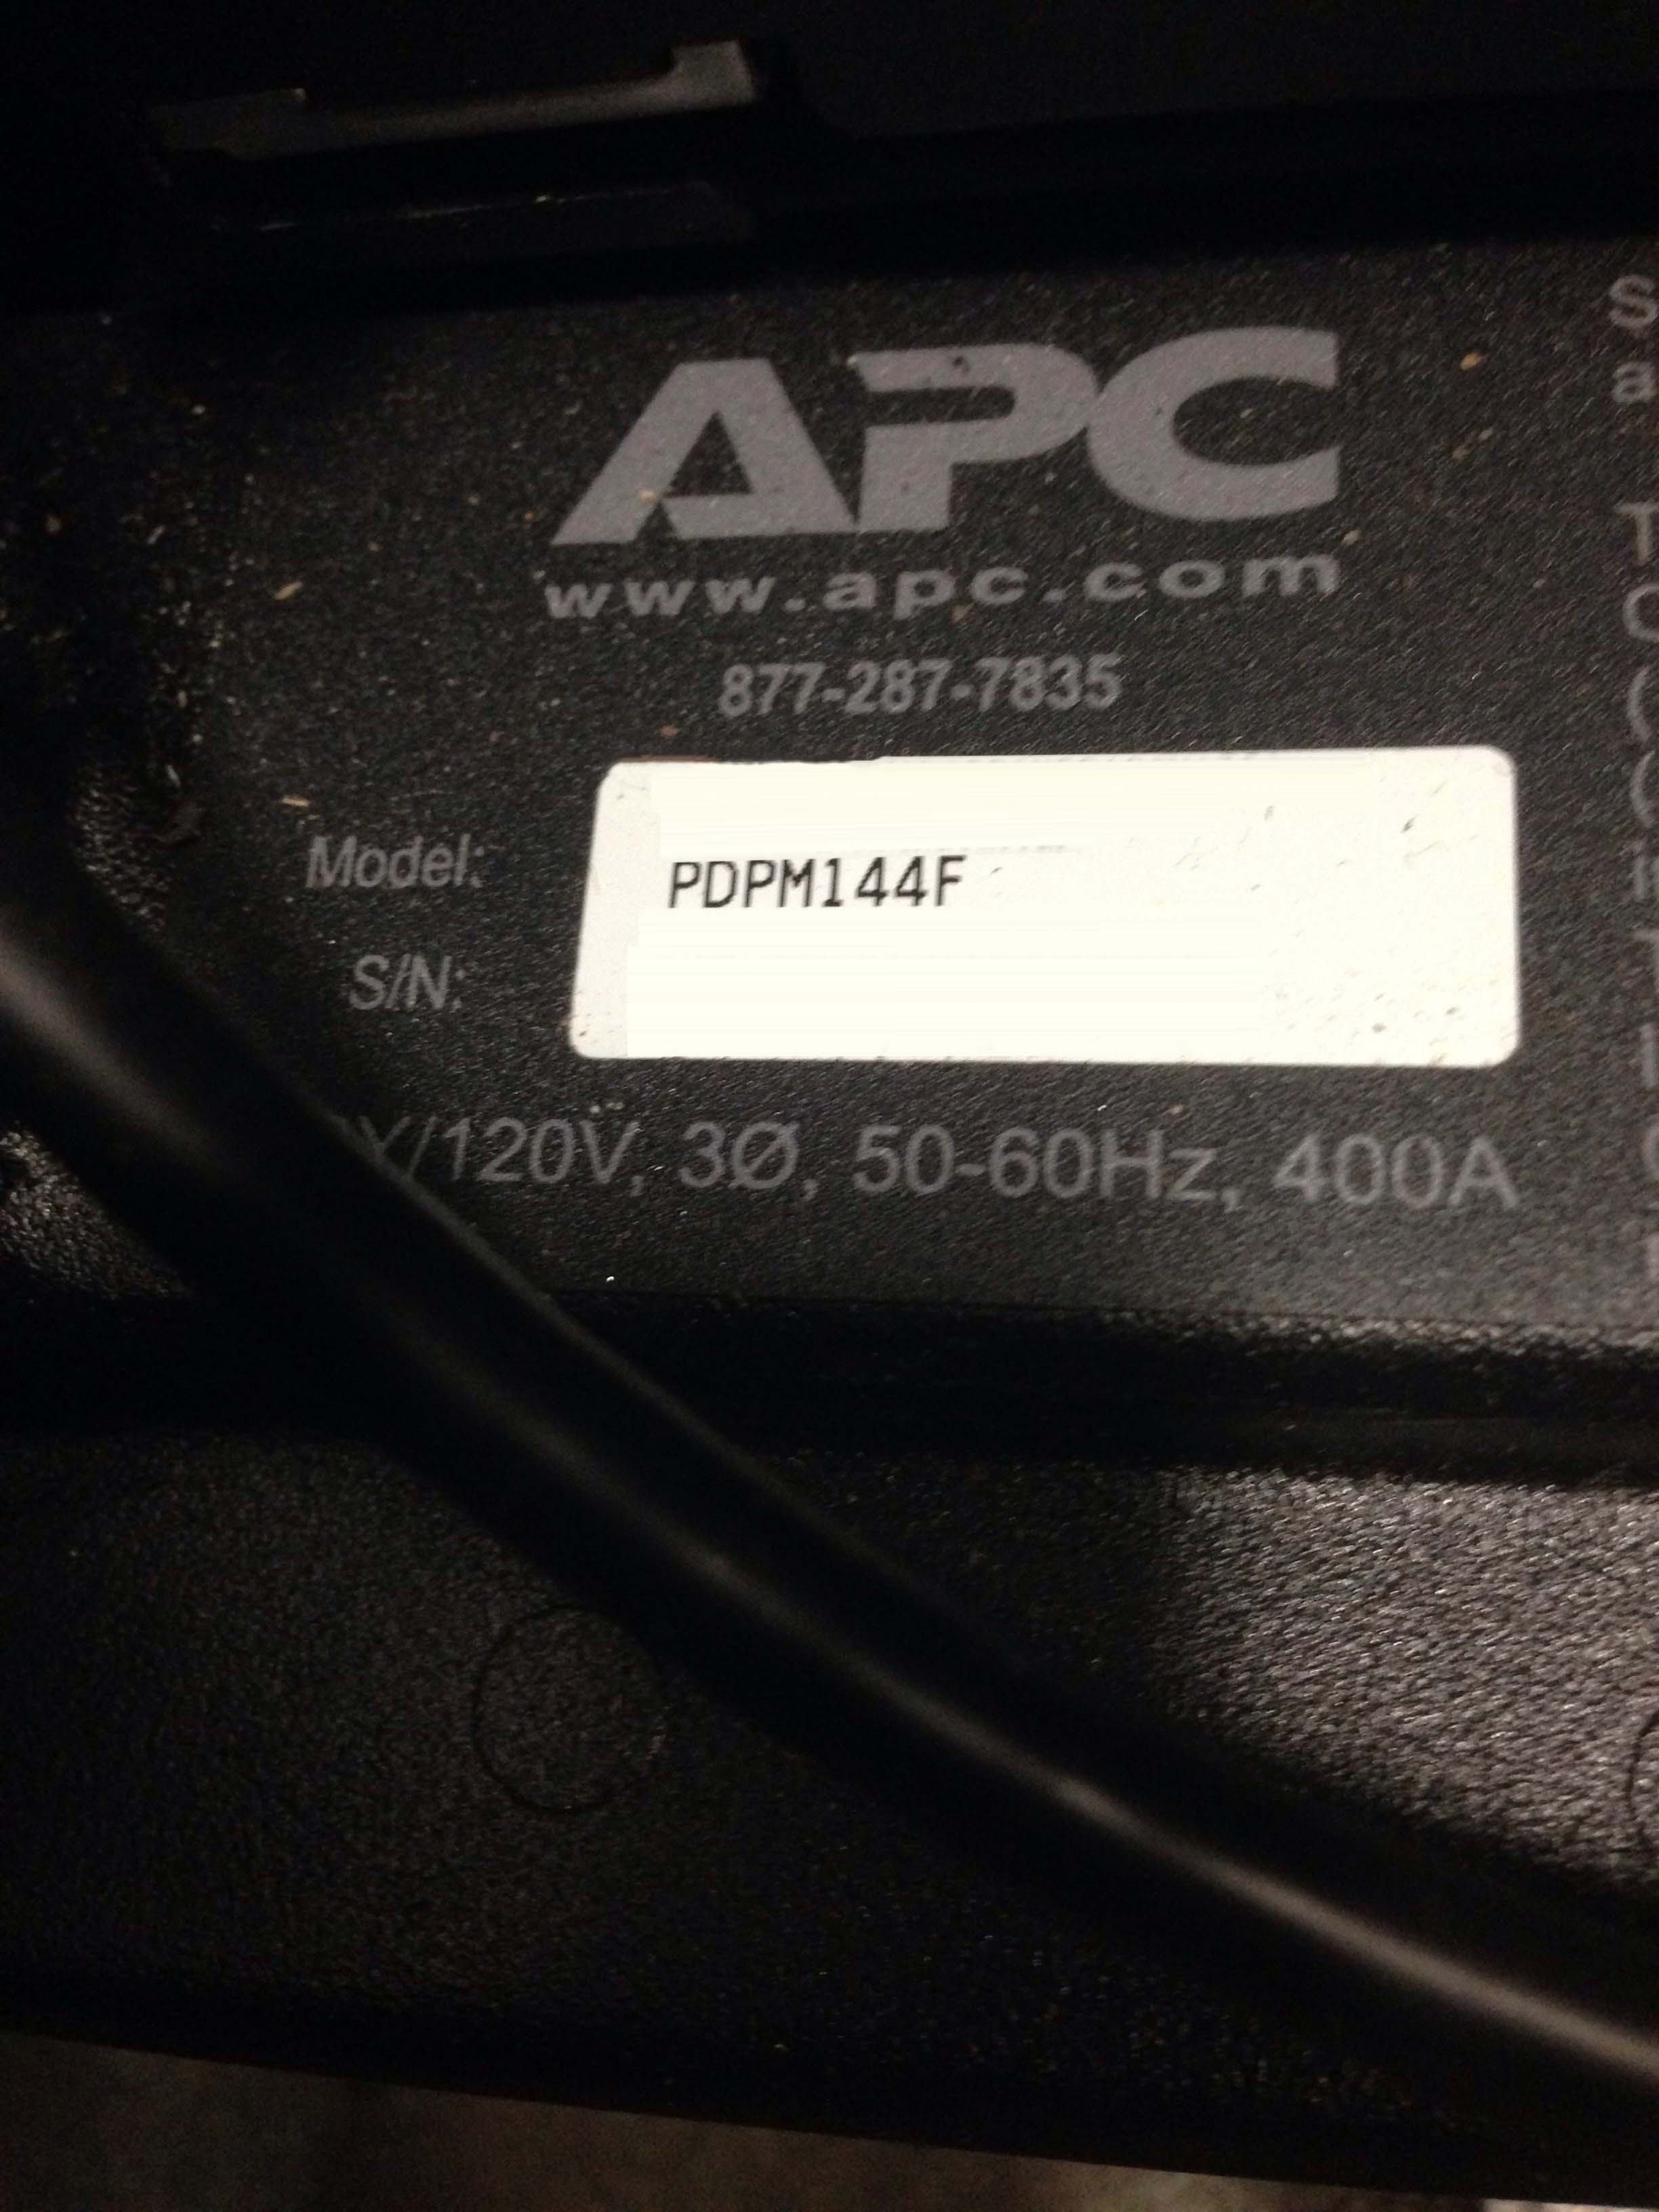 APC PDPM144F used for sale price #9211843 > buy from CAE